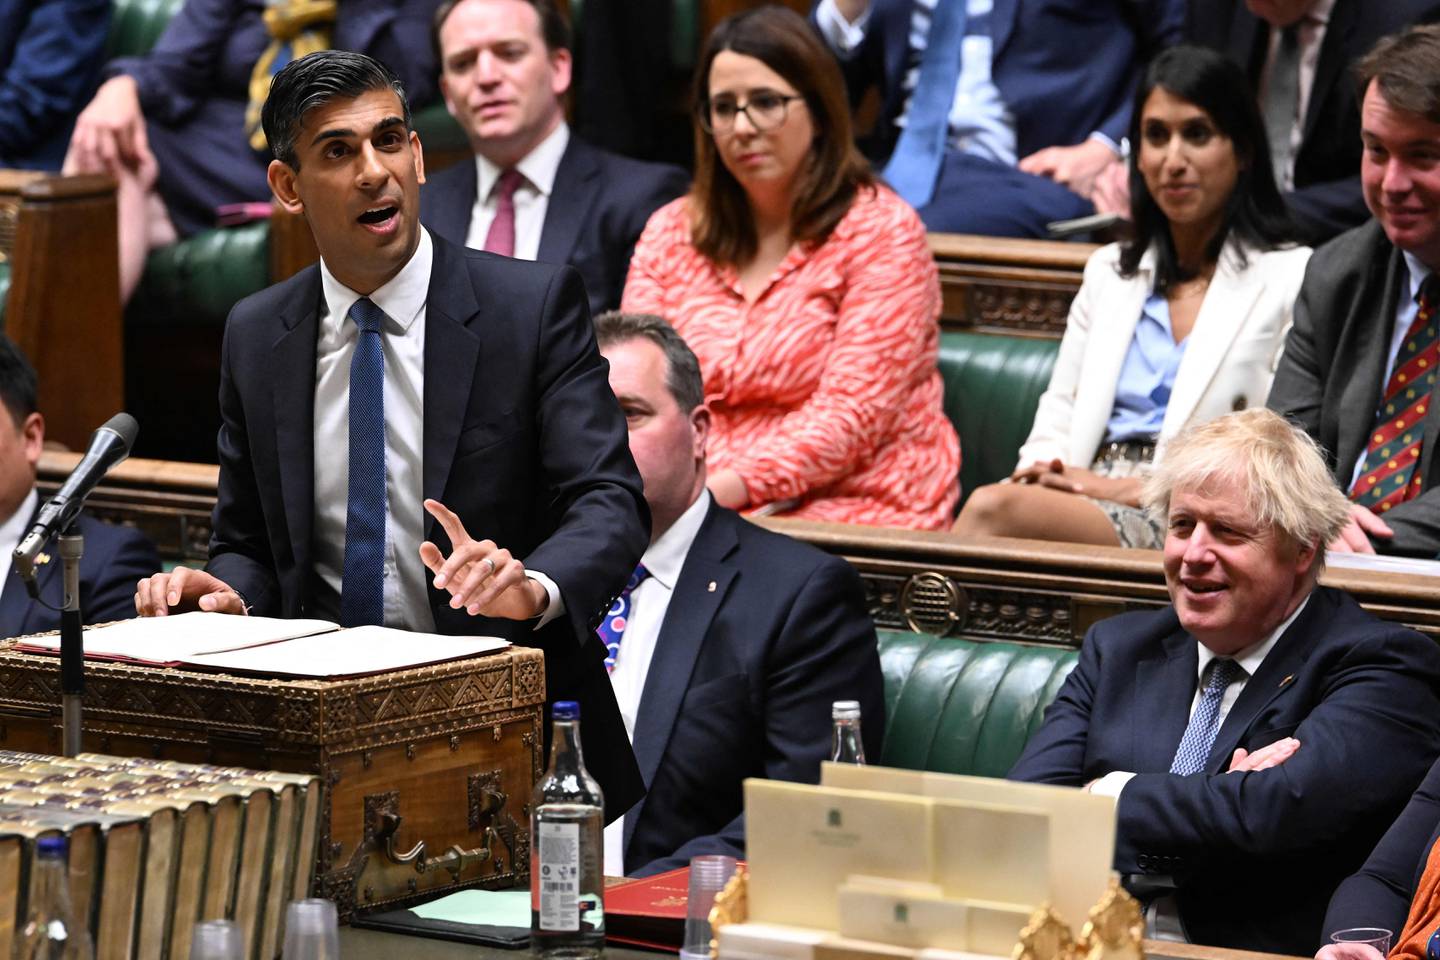 Britain's Chancellor of the Exchequer Rishi Sunak (L) making a statement on the cost of living crisis in the House of Commons on May 26, 2022. AFP